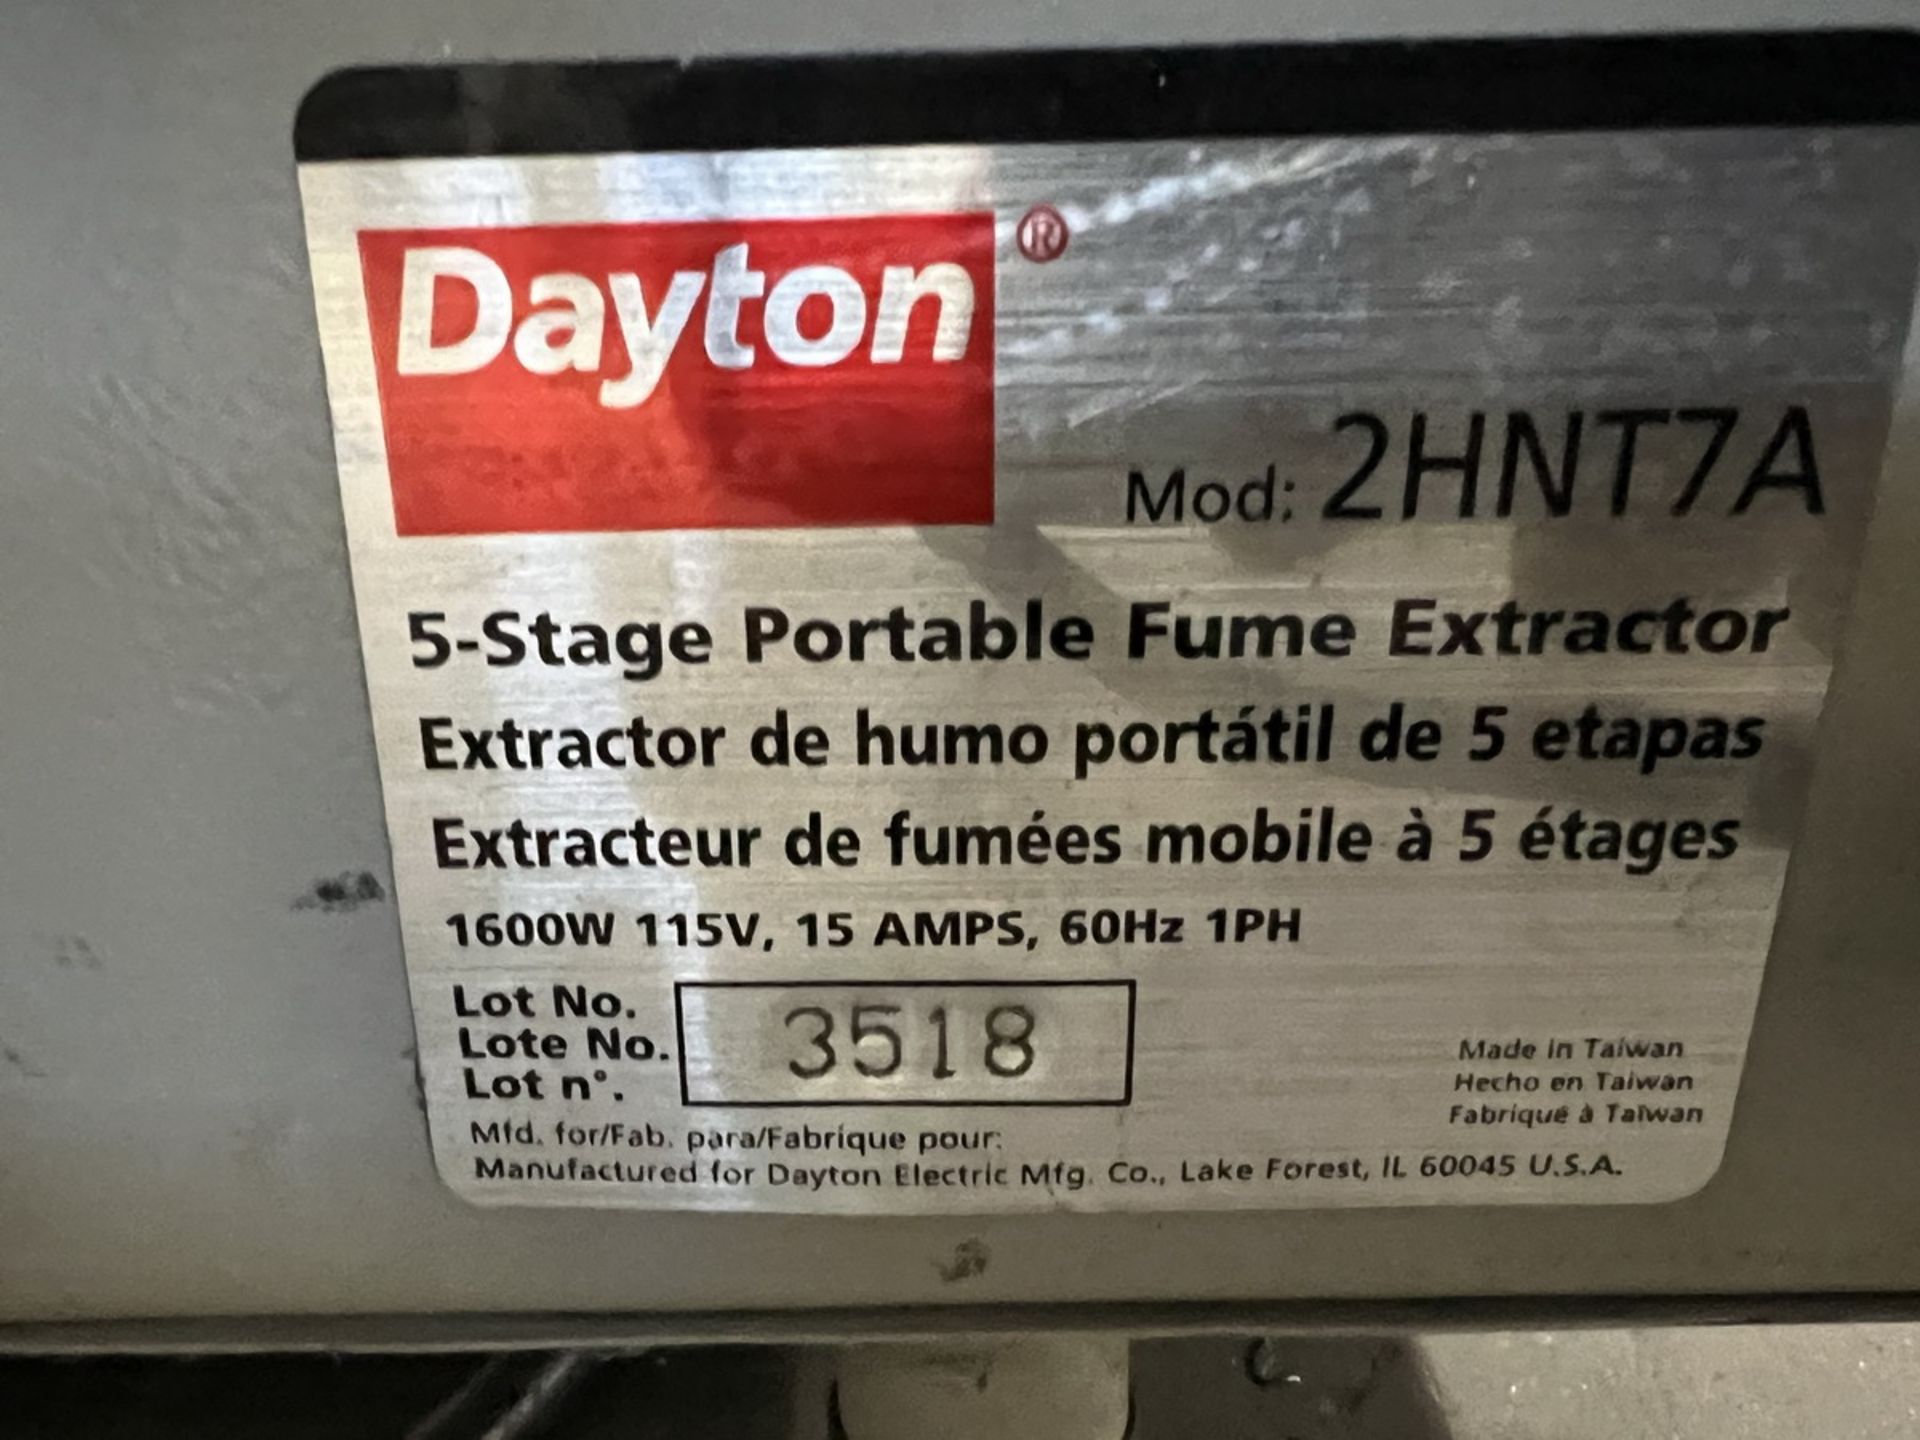 Dayton 2HNT7A 5-Stage Portable Fume Extractor - Image 4 of 4